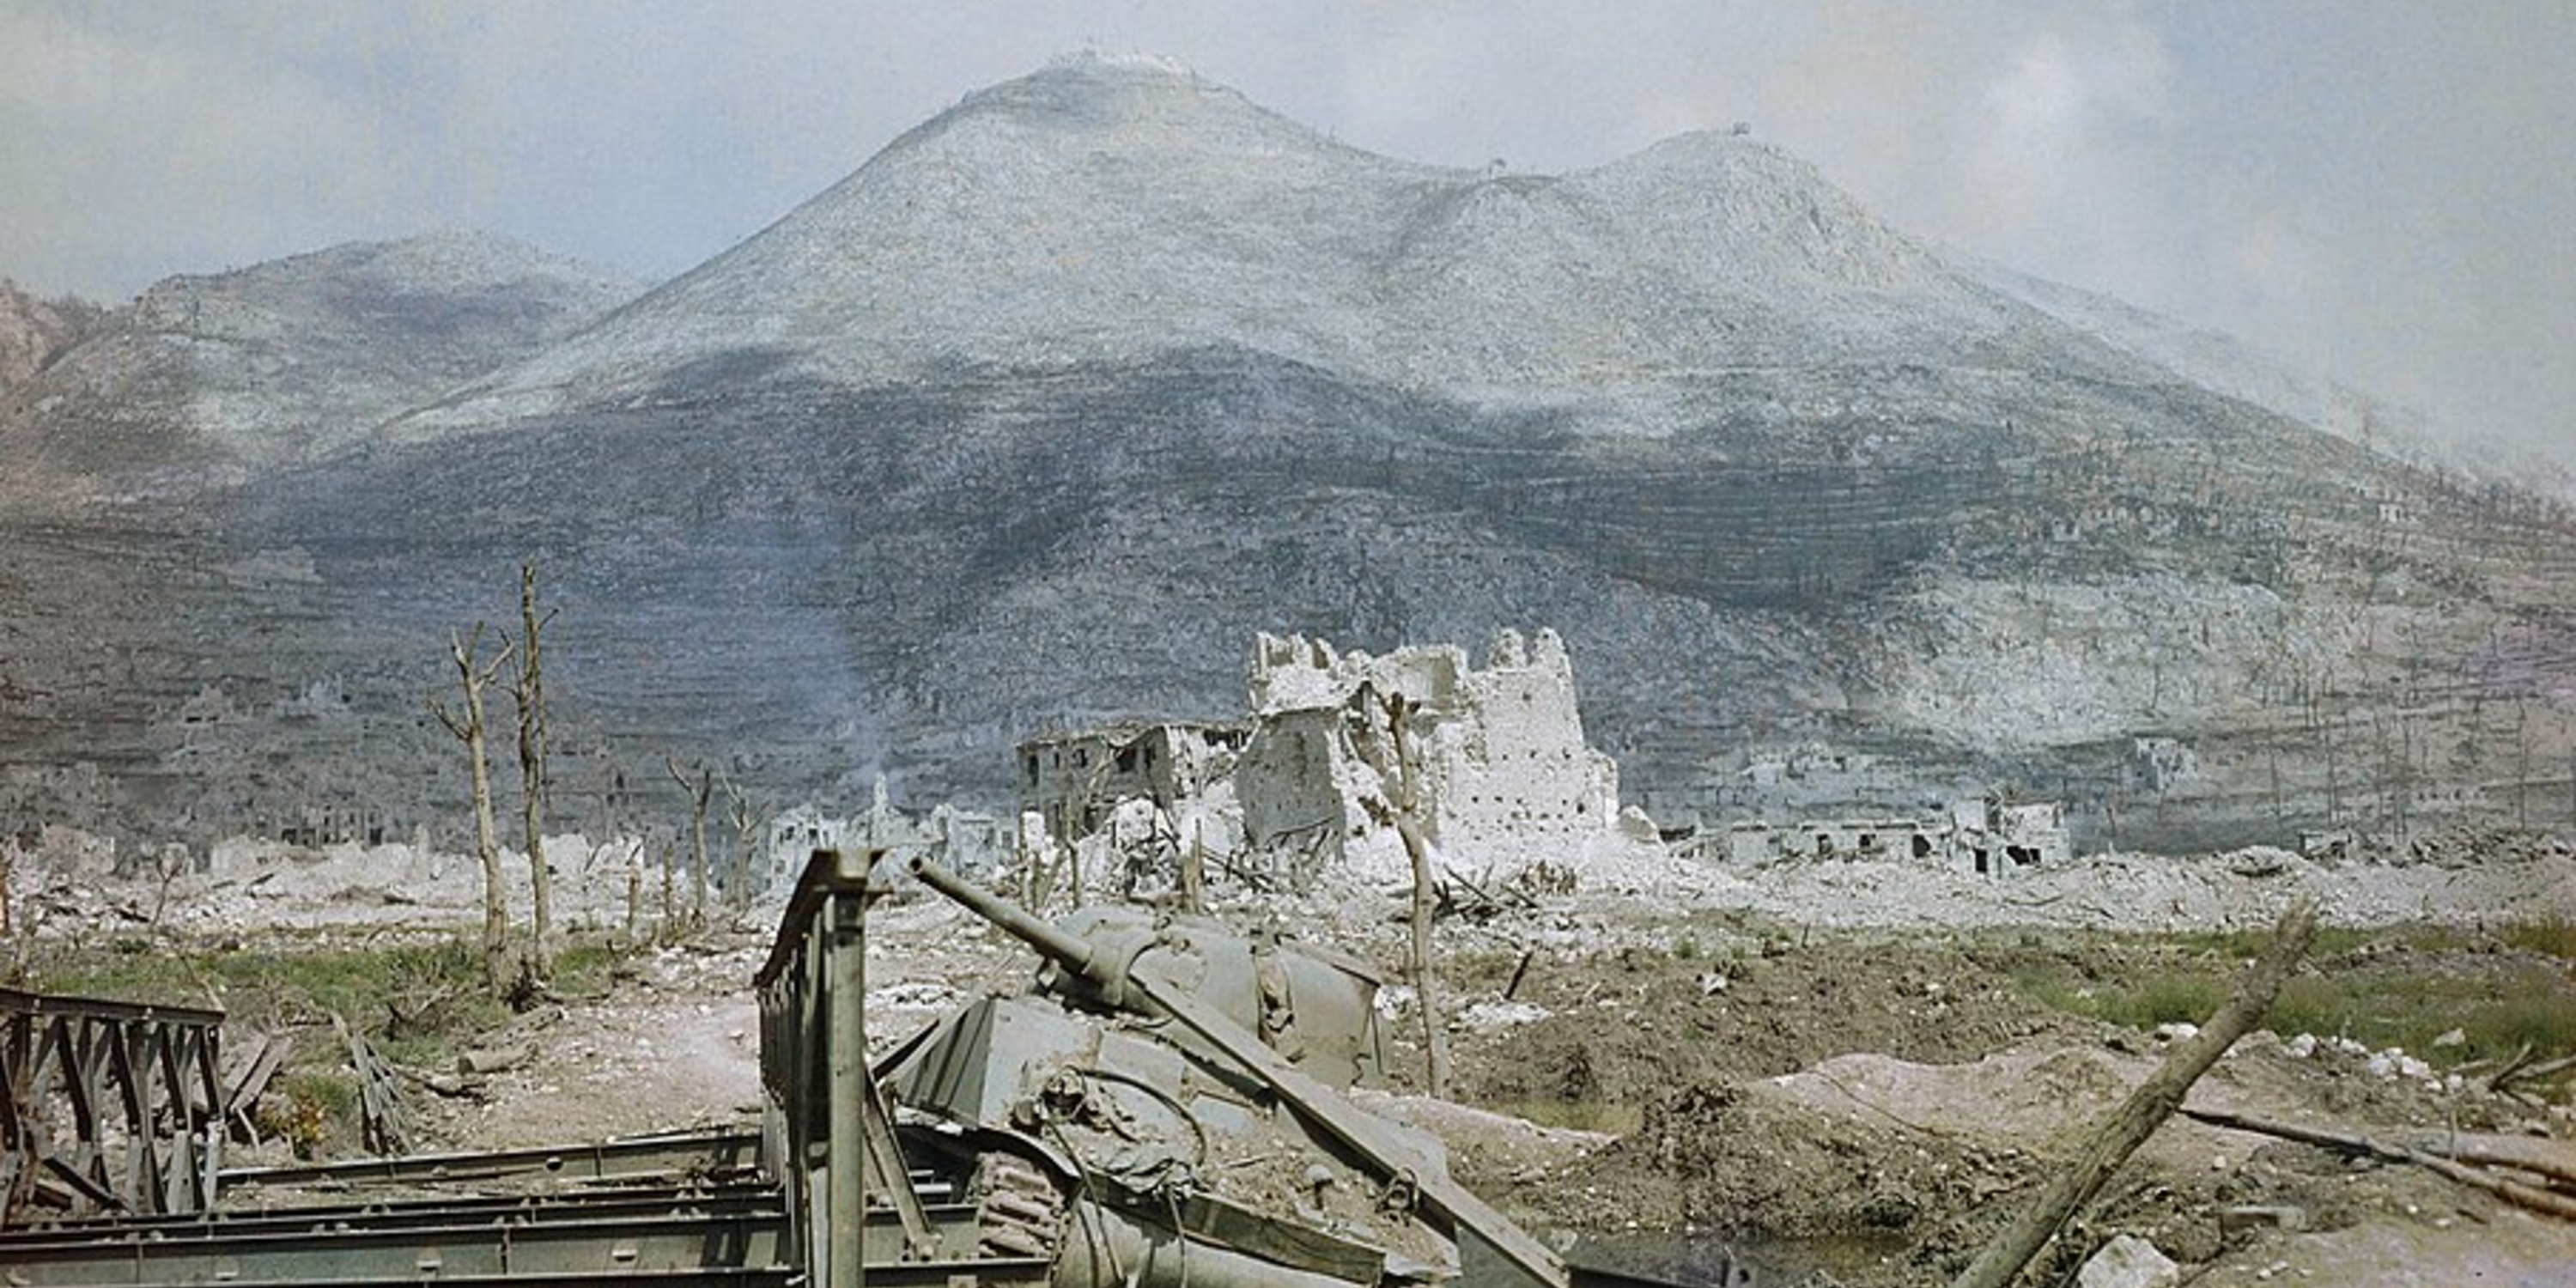 The ruins of Cassino, May 1944 - a wrecked Sherman tank and Bailey bridge in the foreground, with Monastery Ridge and Castle Hill